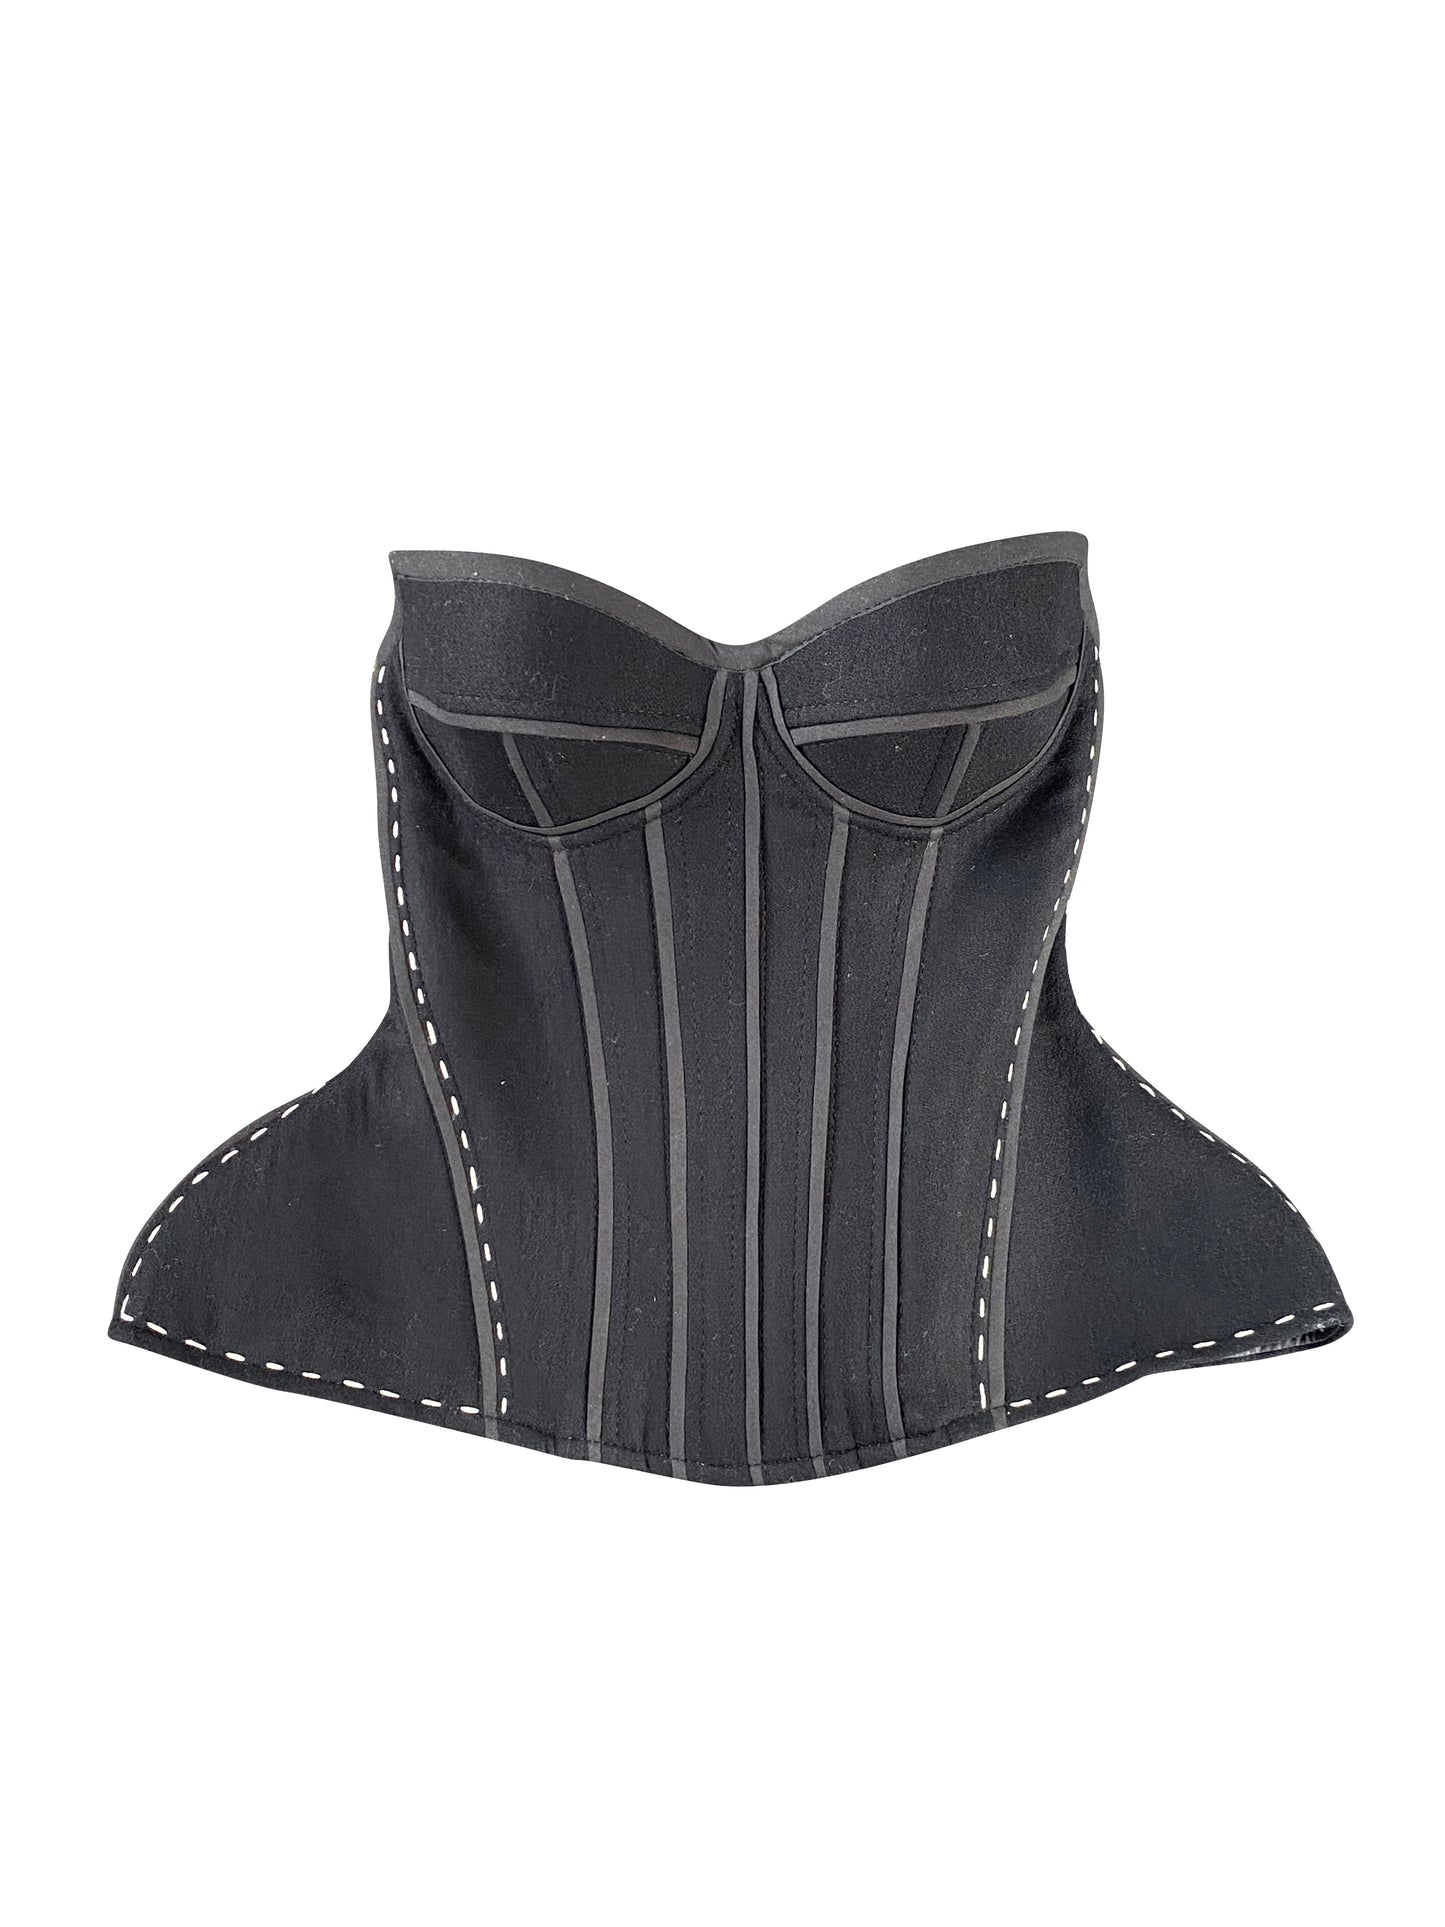 Melton Wool Mothership Corset with Hand Embroidery Stitches